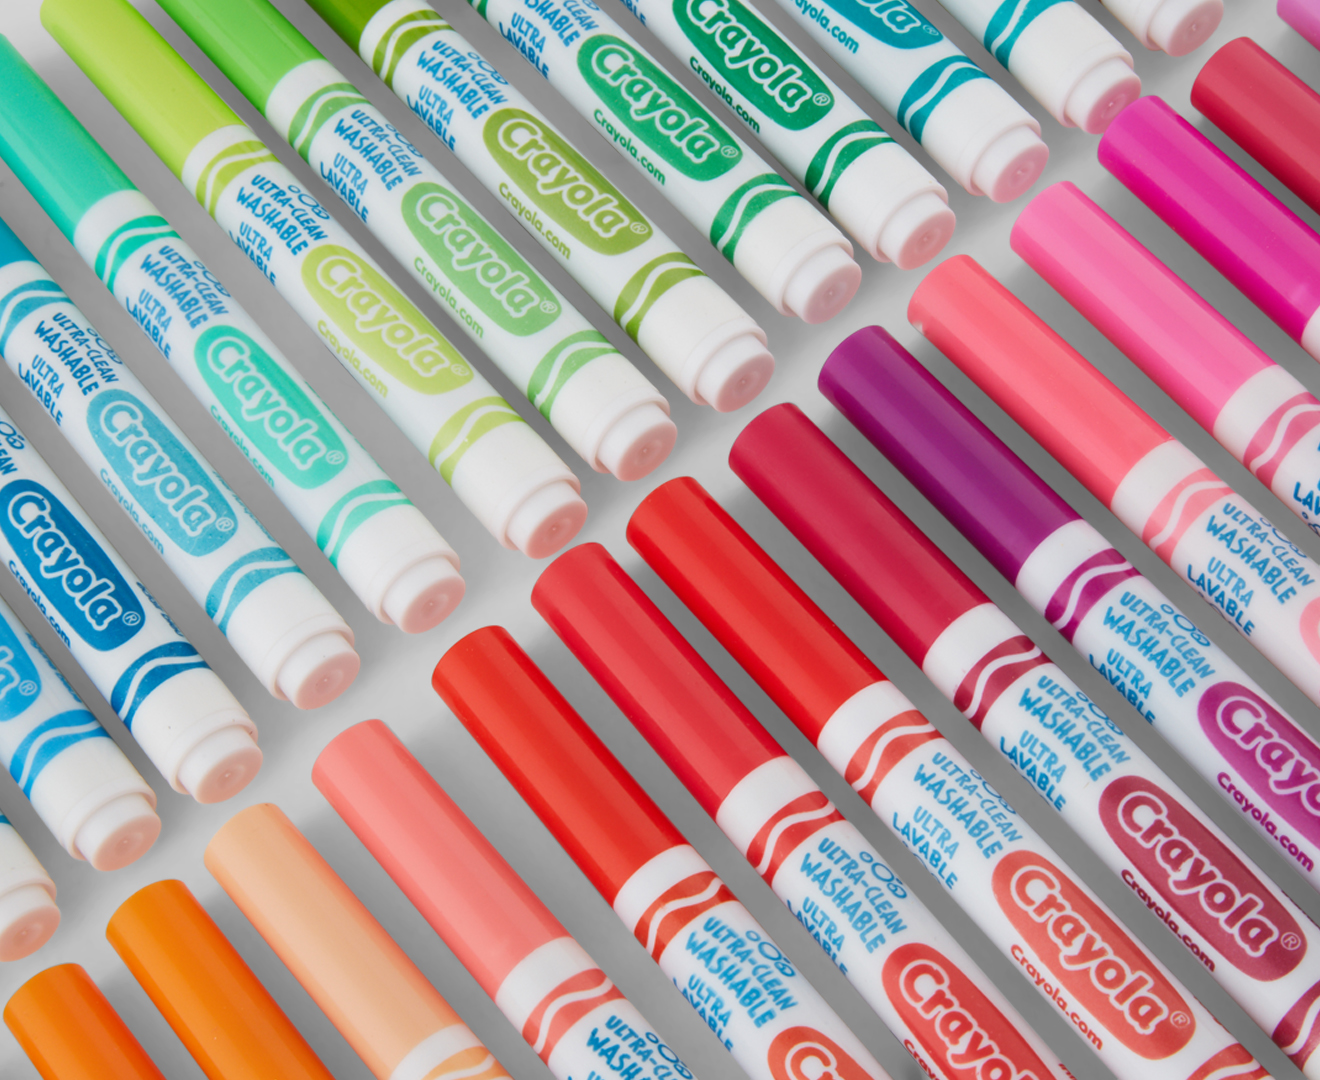 Crayola The Big 40 Washable Markers 40-Pack